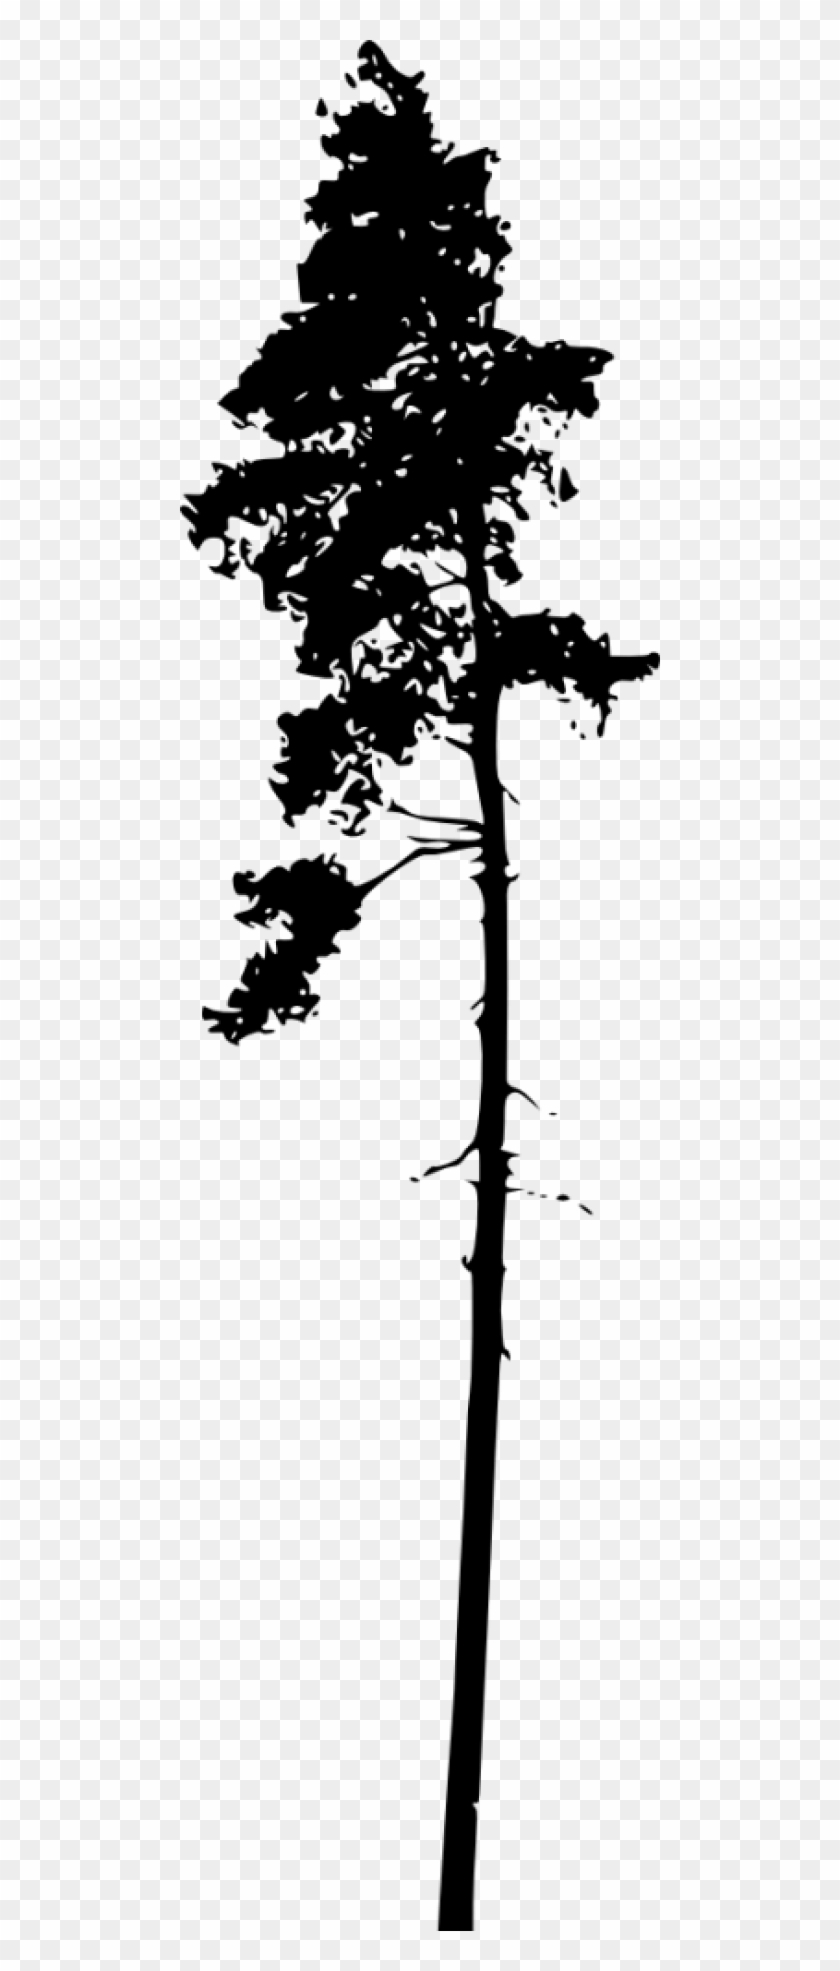 Download Free Png Pine Tree Silhouette Png Images Transparent - Silhouette, Png Download - 480x1891 ...